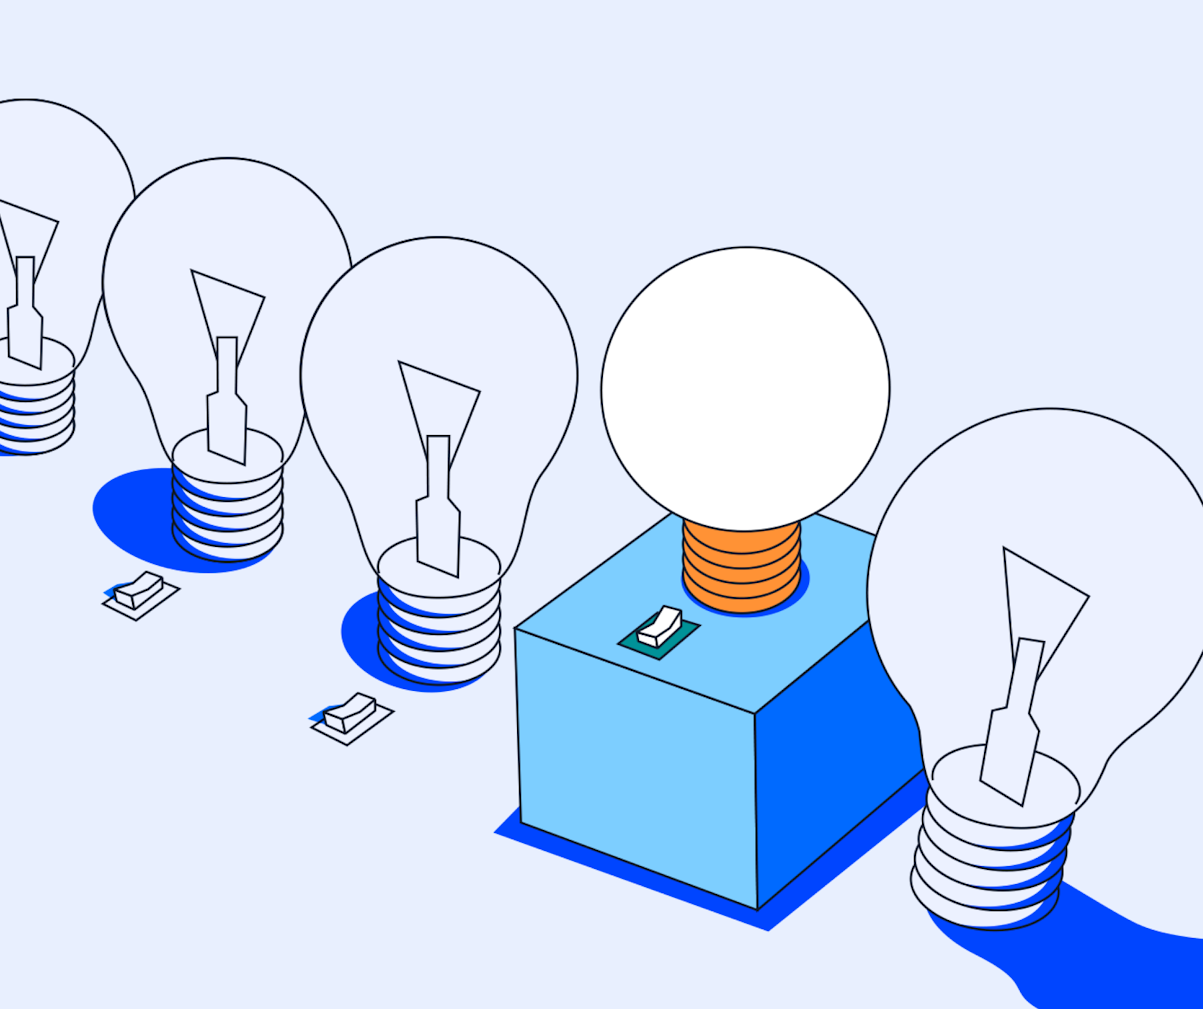 Row of four lightbulbs with switches, one lightbulb is turned on, representing UX leaders